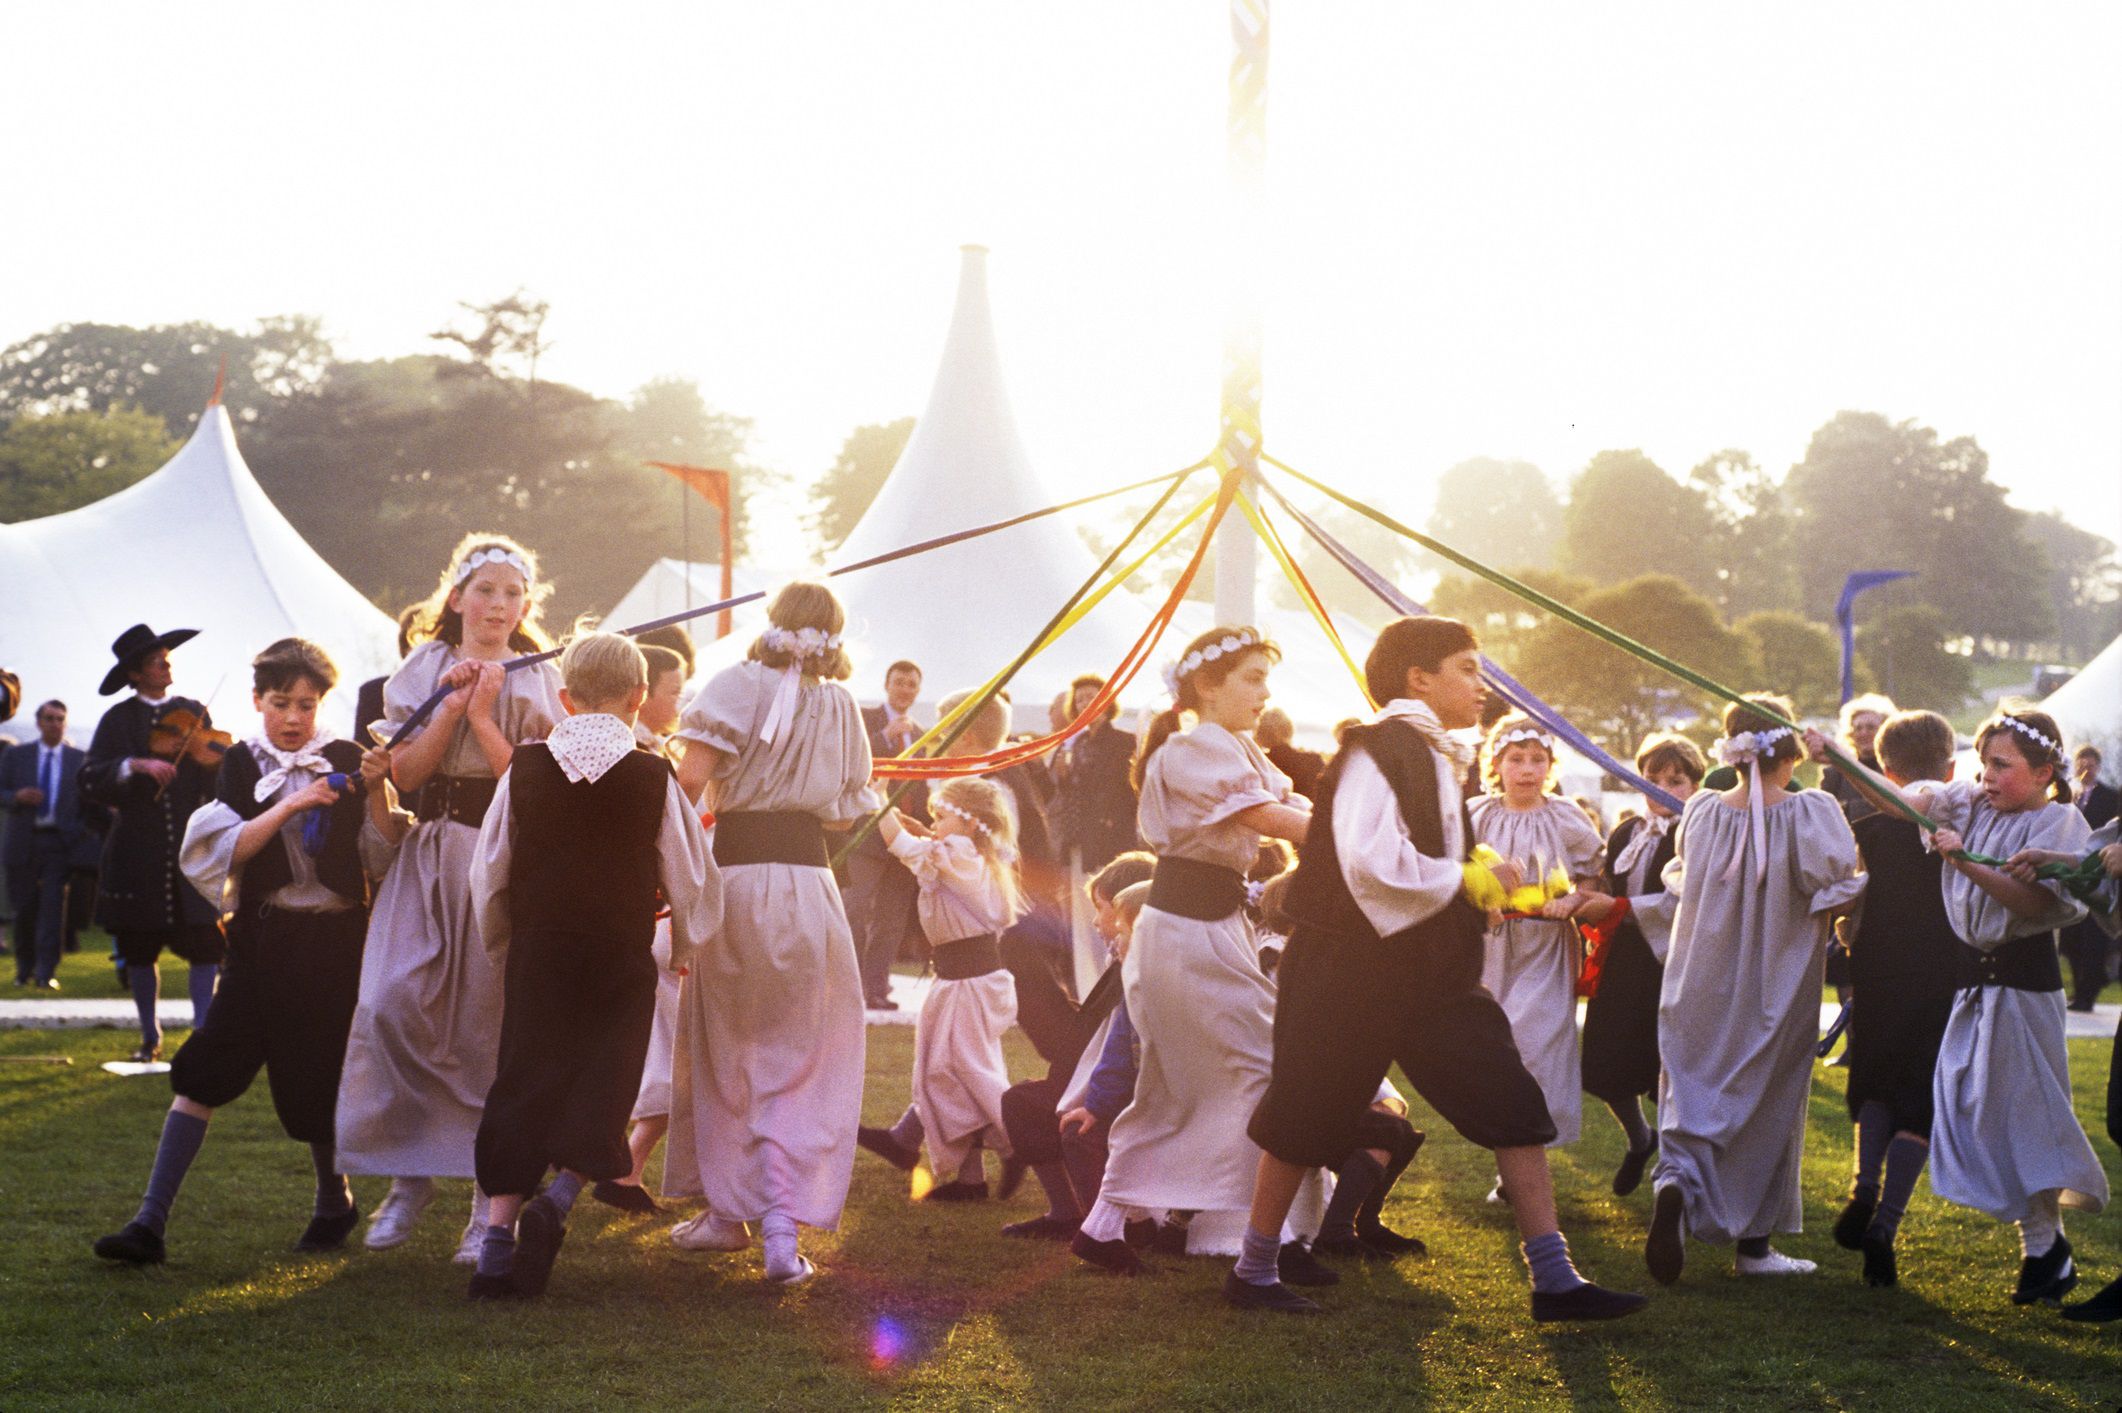 May Day Kicks Off With Festivals and Pagan Traditions